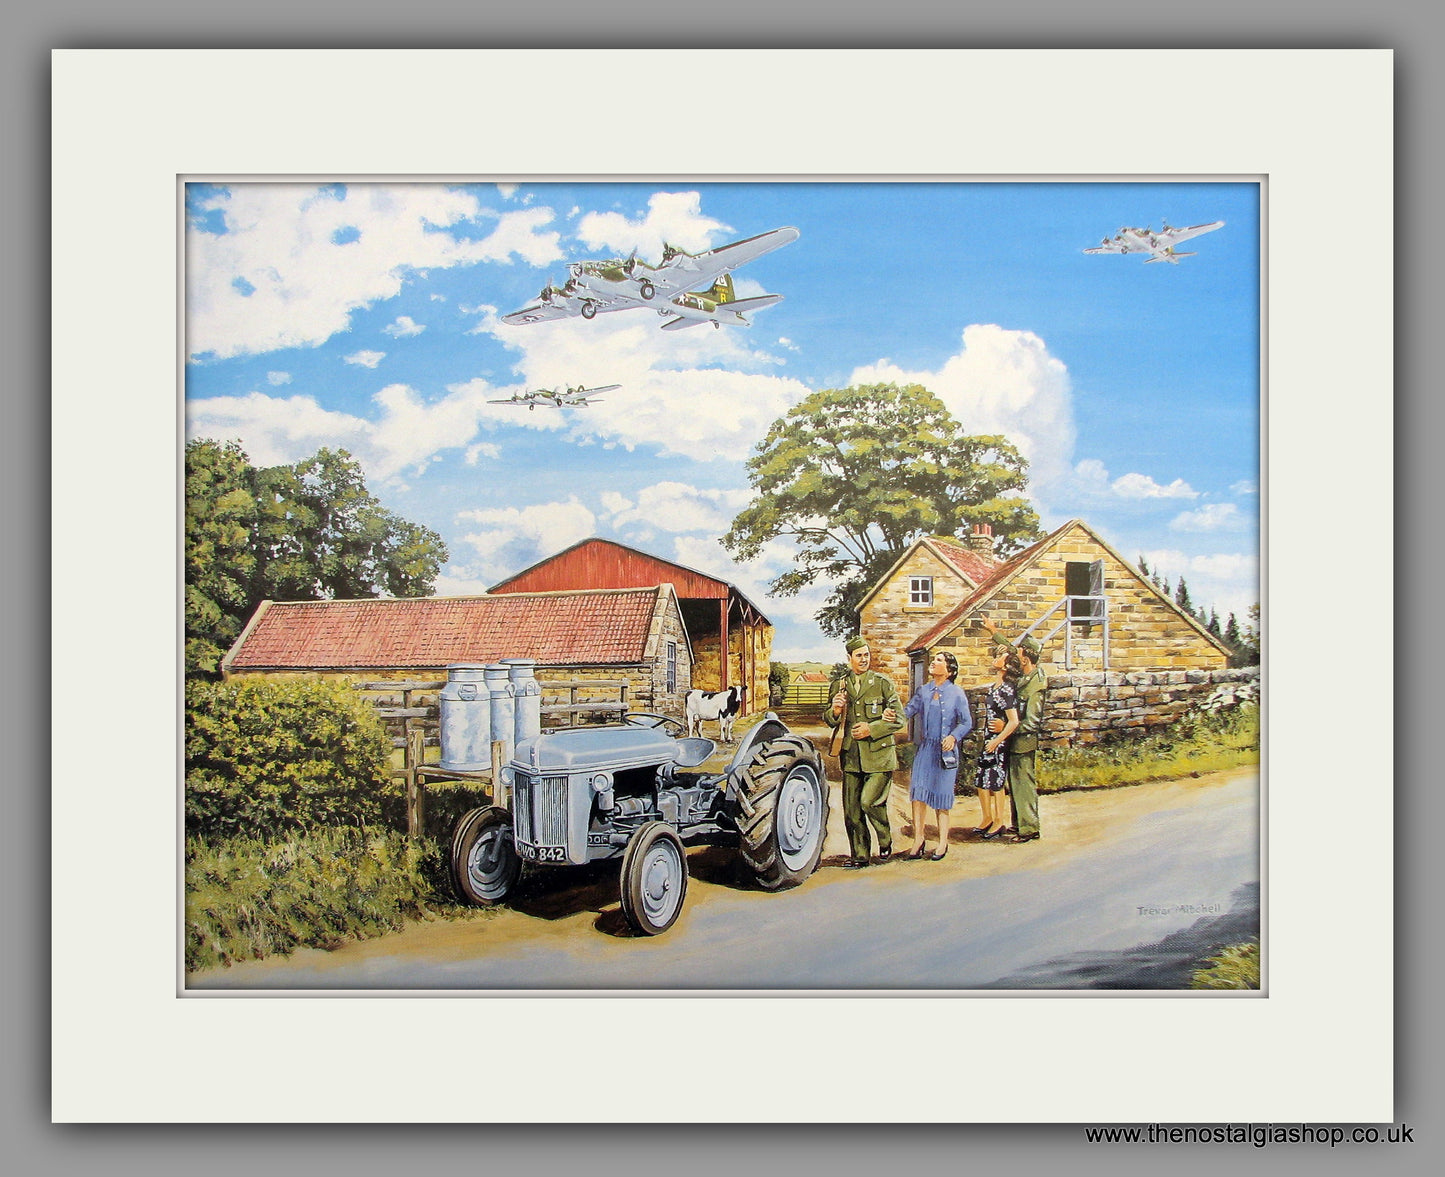 Ferguson Tractor with B17 US Bombers Overhead Mounted Print 'Over Here' (ref N128)